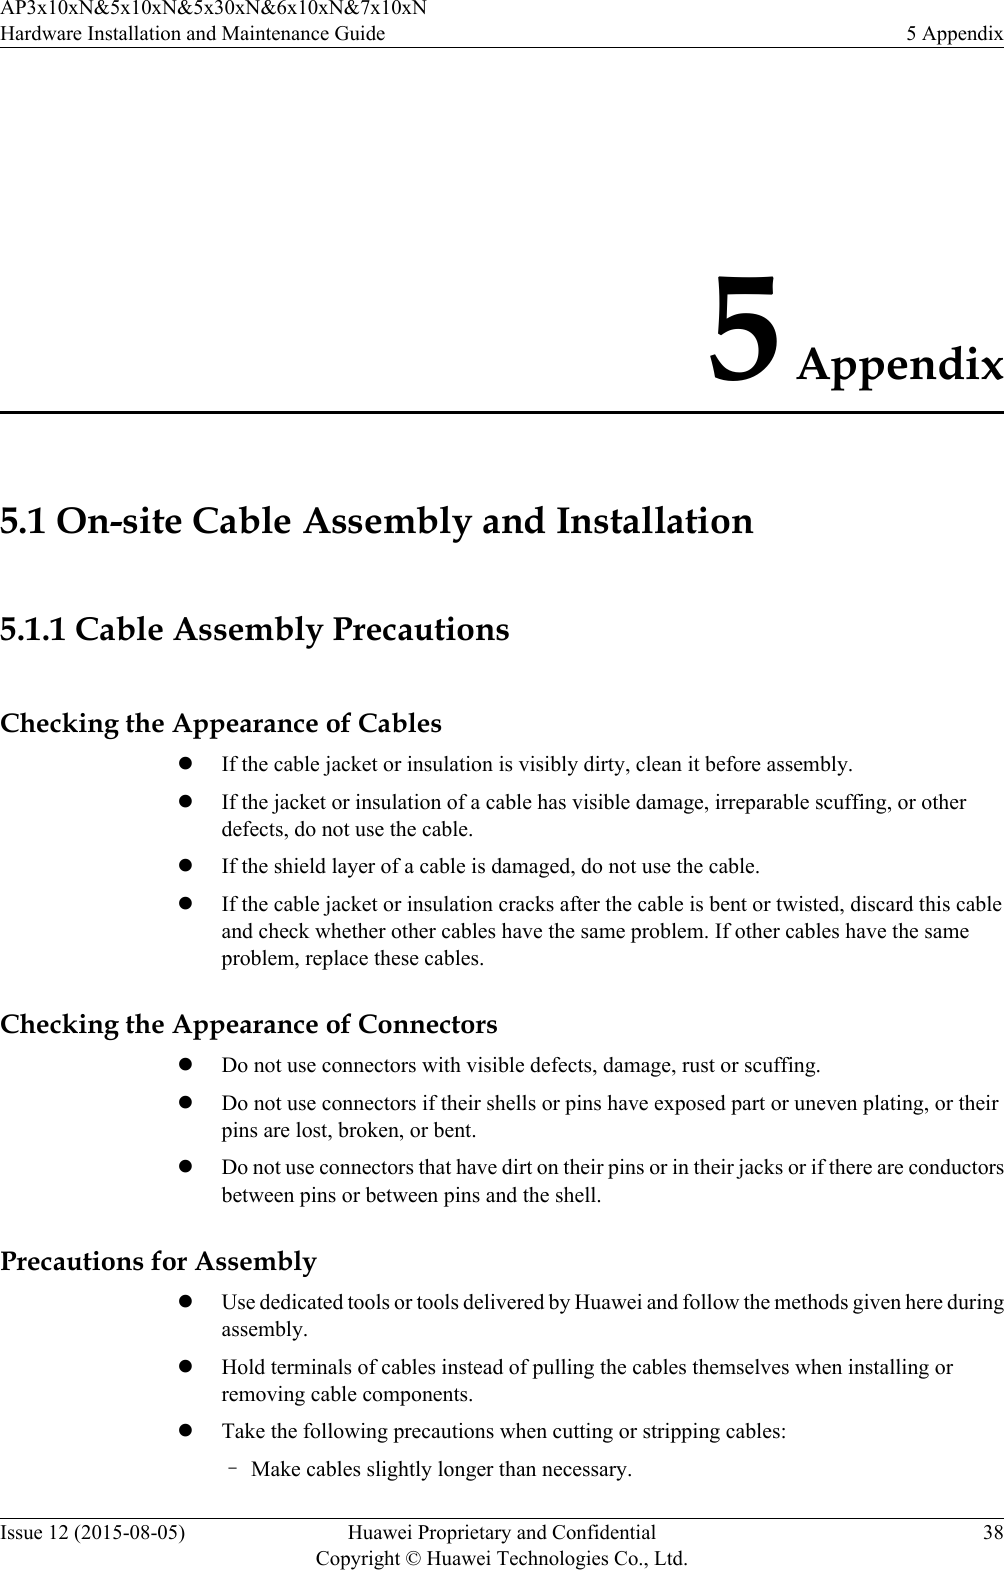 5 Appendix5.1 On-site Cable Assembly and Installation5.1.1 Cable Assembly PrecautionsChecking the Appearance of CableslIf the cable jacket or insulation is visibly dirty, clean it before assembly.lIf the jacket or insulation of a cable has visible damage, irreparable scuffing, or otherdefects, do not use the cable.lIf the shield layer of a cable is damaged, do not use the cable.lIf the cable jacket or insulation cracks after the cable is bent or twisted, discard this cableand check whether other cables have the same problem. If other cables have the sameproblem, replace these cables.Checking the Appearance of ConnectorslDo not use connectors with visible defects, damage, rust or scuffing.lDo not use connectors if their shells or pins have exposed part or uneven plating, or theirpins are lost, broken, or bent.lDo not use connectors that have dirt on their pins or in their jacks or if there are conductorsbetween pins or between pins and the shell.Precautions for AssemblylUse dedicated tools or tools delivered by Huawei and follow the methods given here duringassembly.lHold terminals of cables instead of pulling the cables themselves when installing orremoving cable components.lTake the following precautions when cutting or stripping cables:–Make cables slightly longer than necessary.AP3x10xN&amp;5x10xN&amp;5x30xN&amp;6x10xN&amp;7x10xNHardware Installation and Maintenance Guide 5 AppendixIssue 12 (2015-08-05) Huawei Proprietary and ConfidentialCopyright © Huawei Technologies Co., Ltd.38